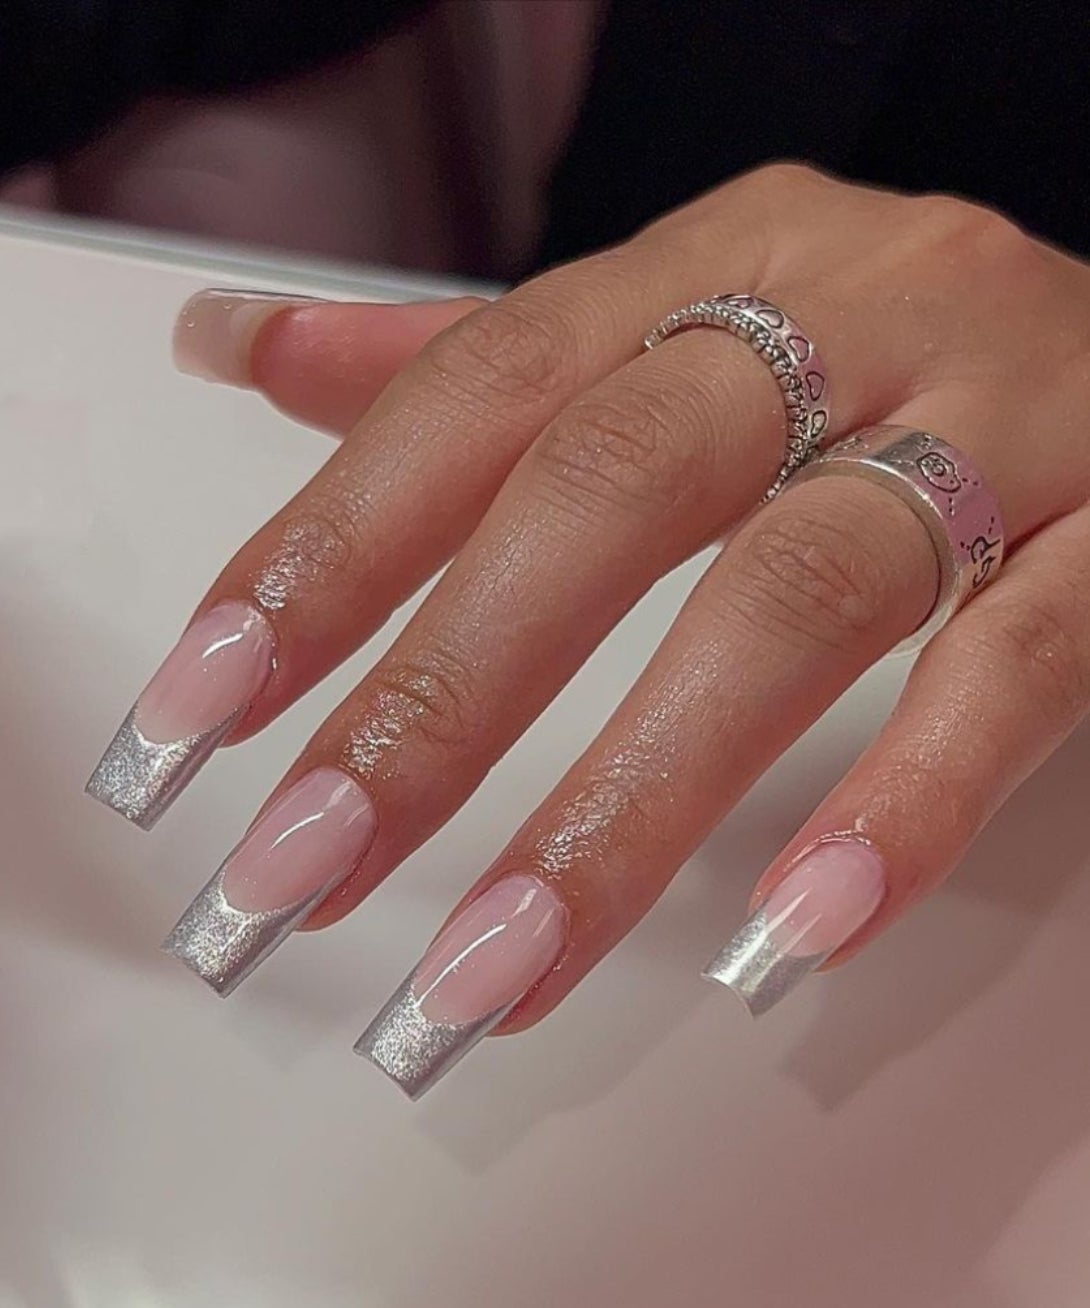 What You Need to Know About Acrylic Nails - ClassPass Blog